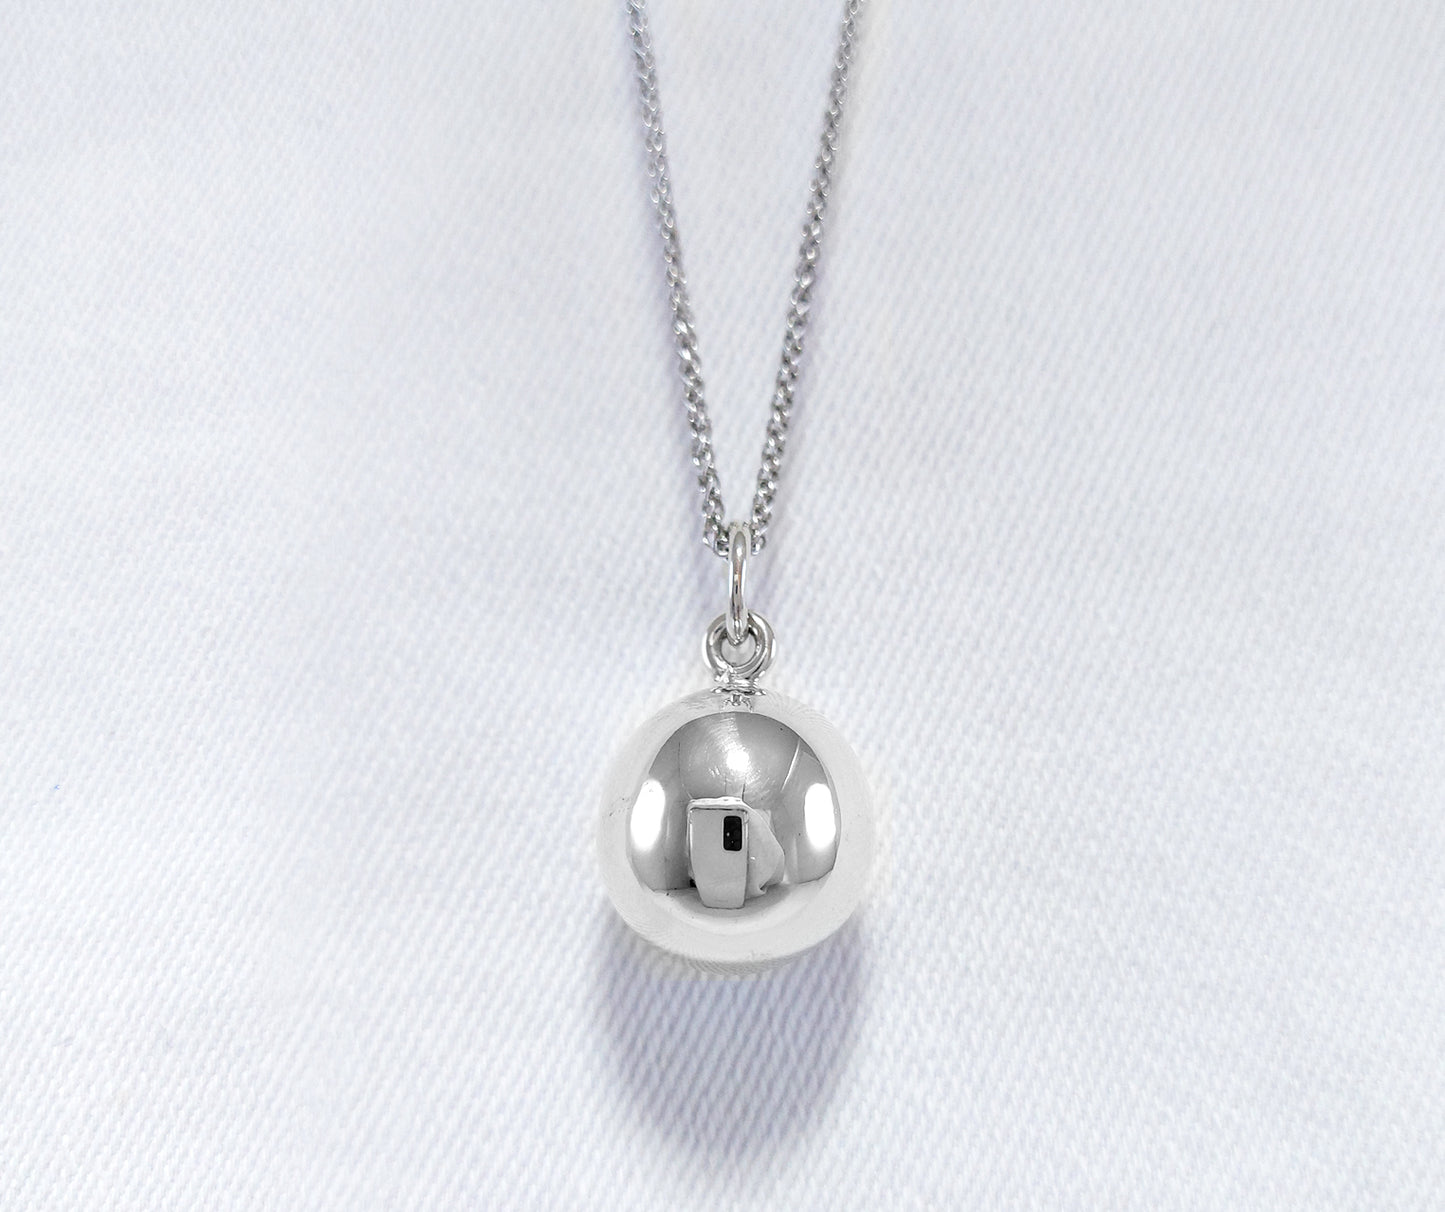 Sterling Silver Melody Ball Pendant. 